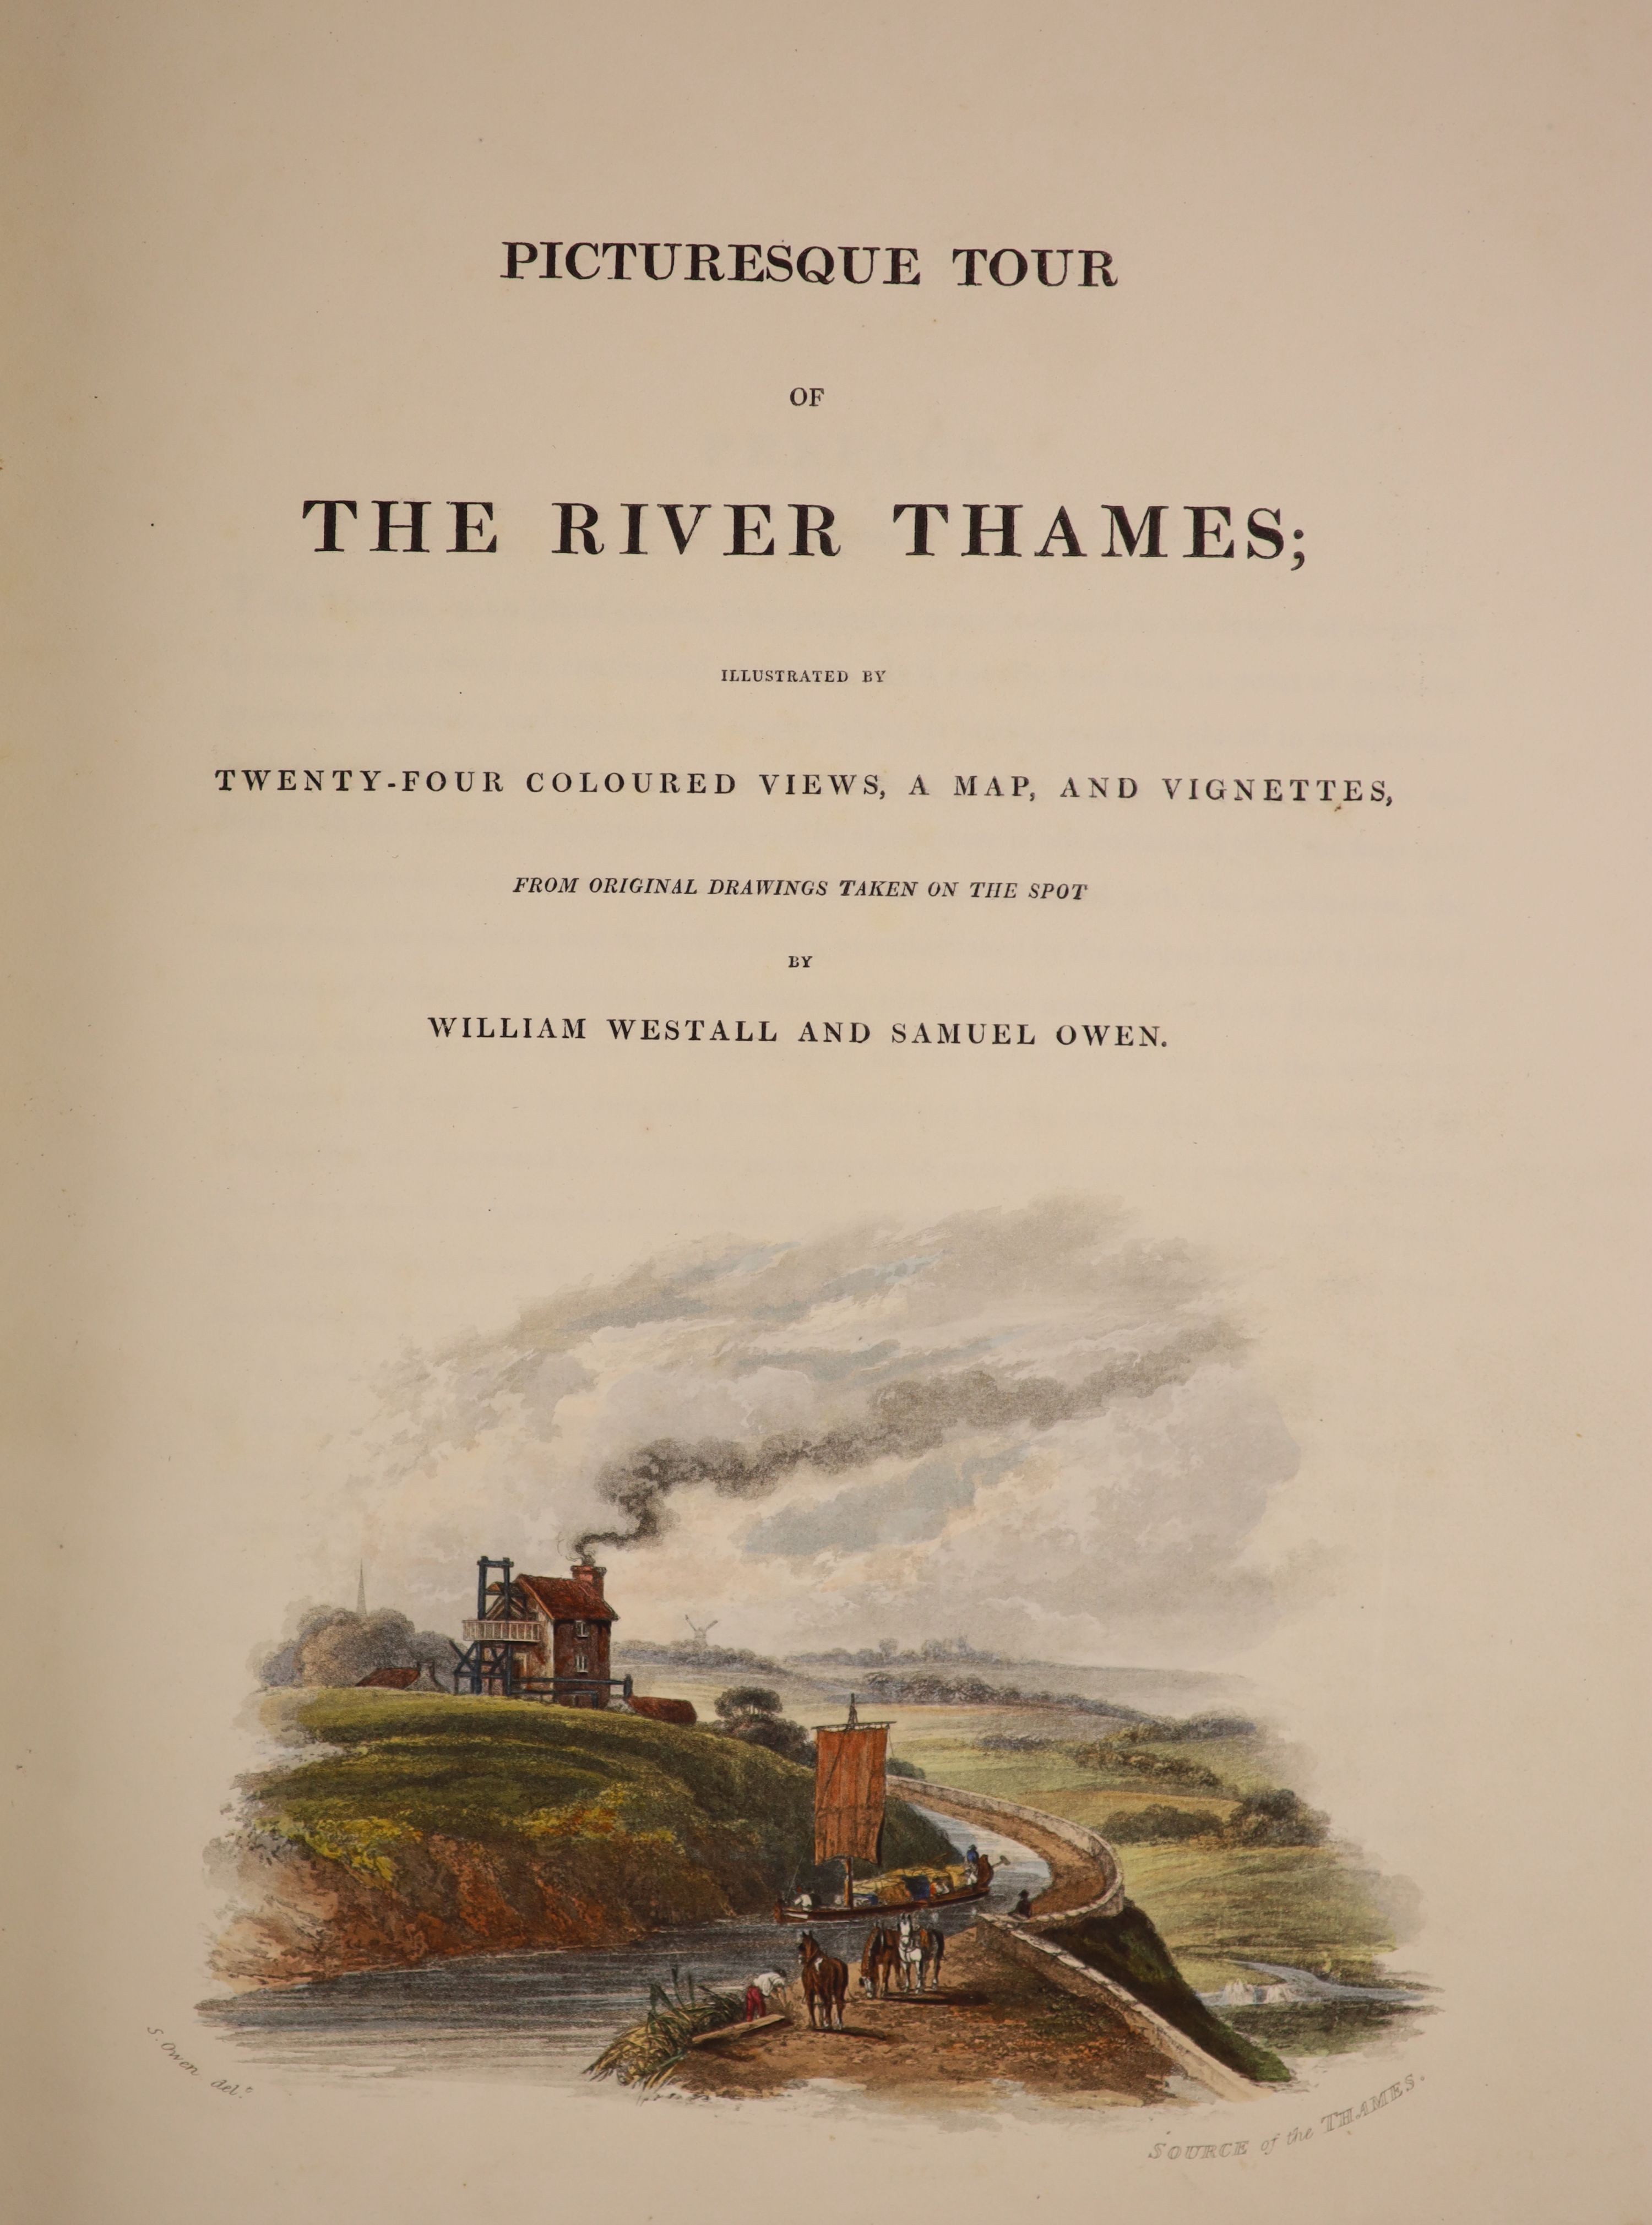 Westall, William and Owen, Samuel - Picturesque Tour of The River Thames, qto, calf with marbled boards, with folding map and 24 plates, Ackermann, London, 1828